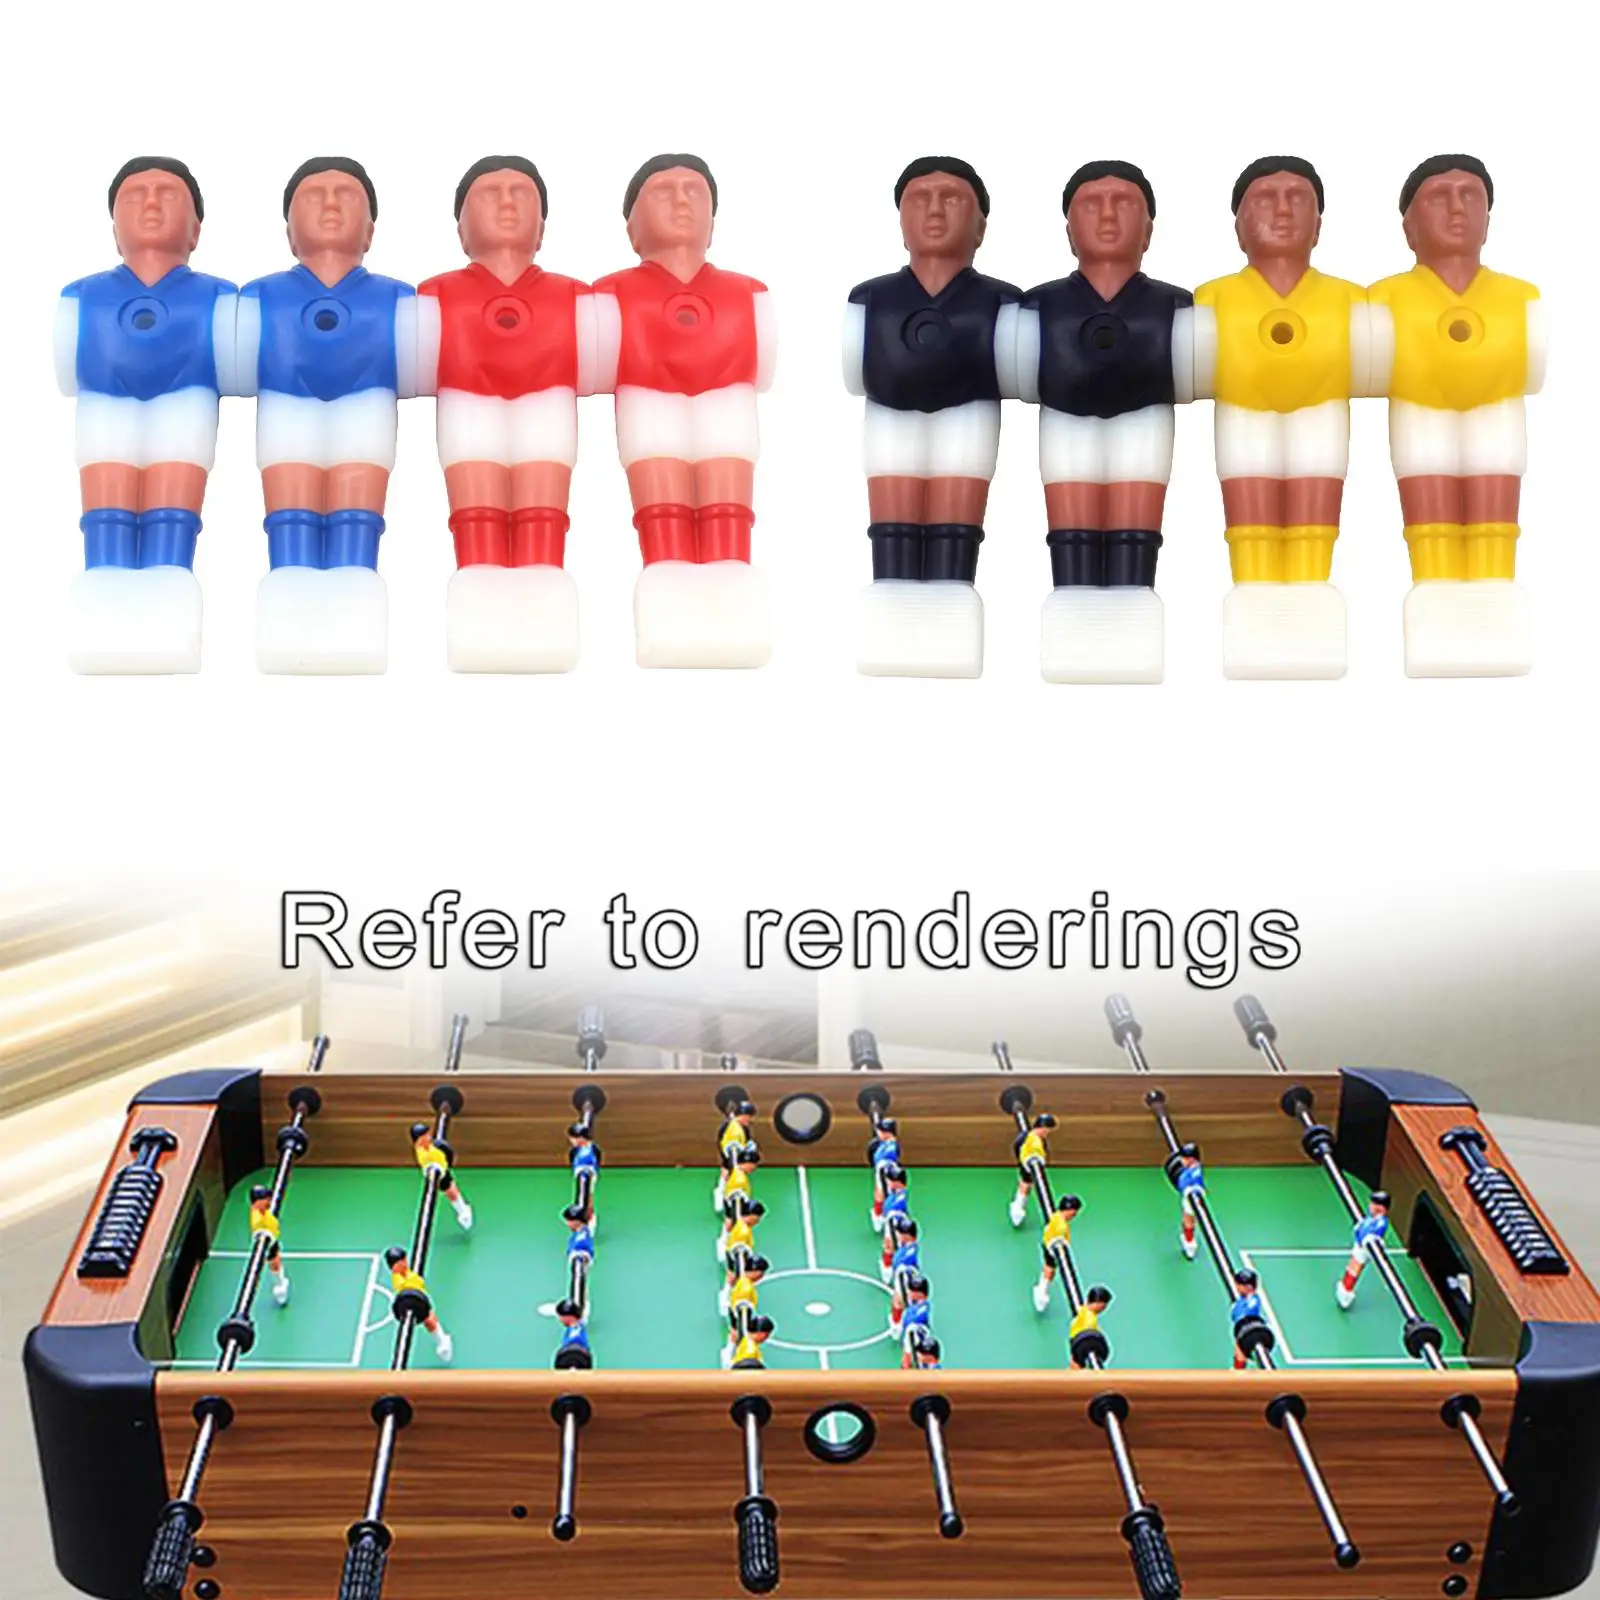 4 Pieces Resin Foosball Men soccer for table Top Guys Miniature Football Players Model Tournament Indoor Entertainment Parts